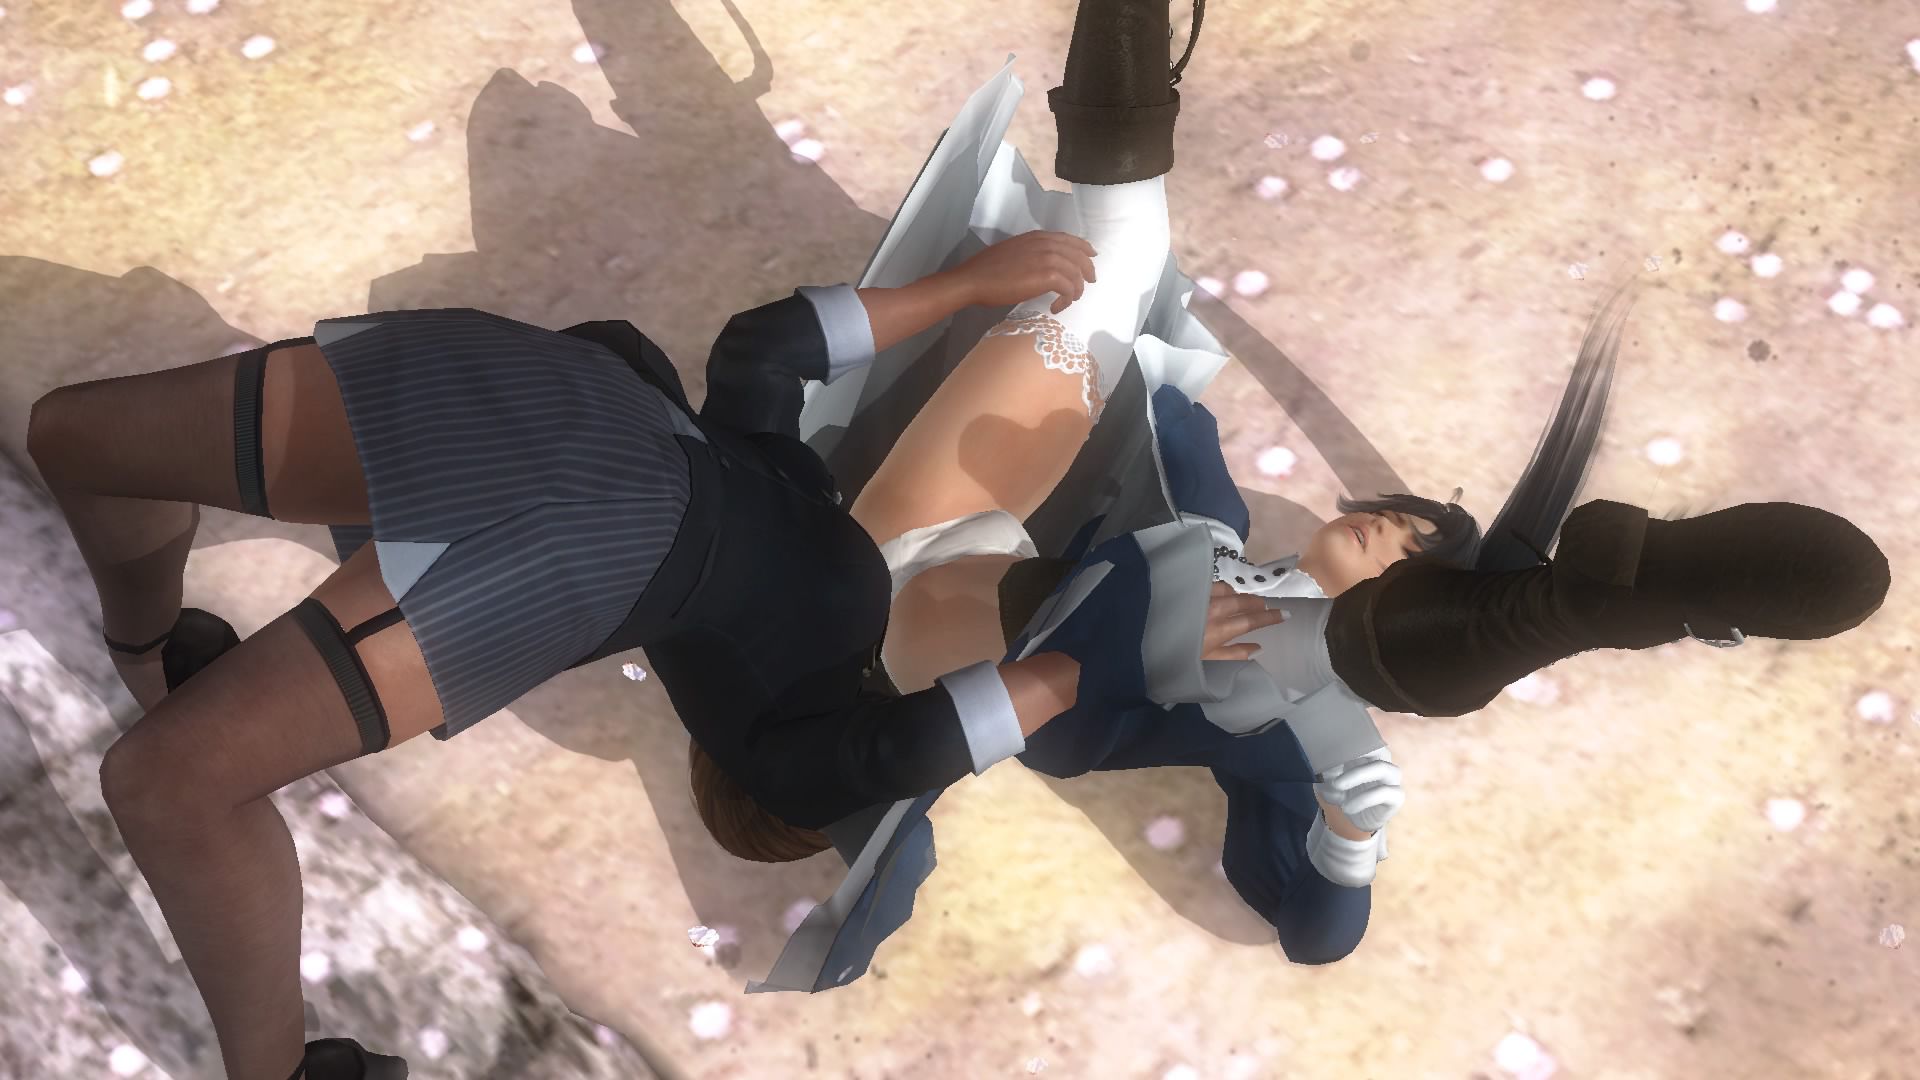 DOA5LR leaves (special designer prizes KOs) to ryona with butterfly suplex 7